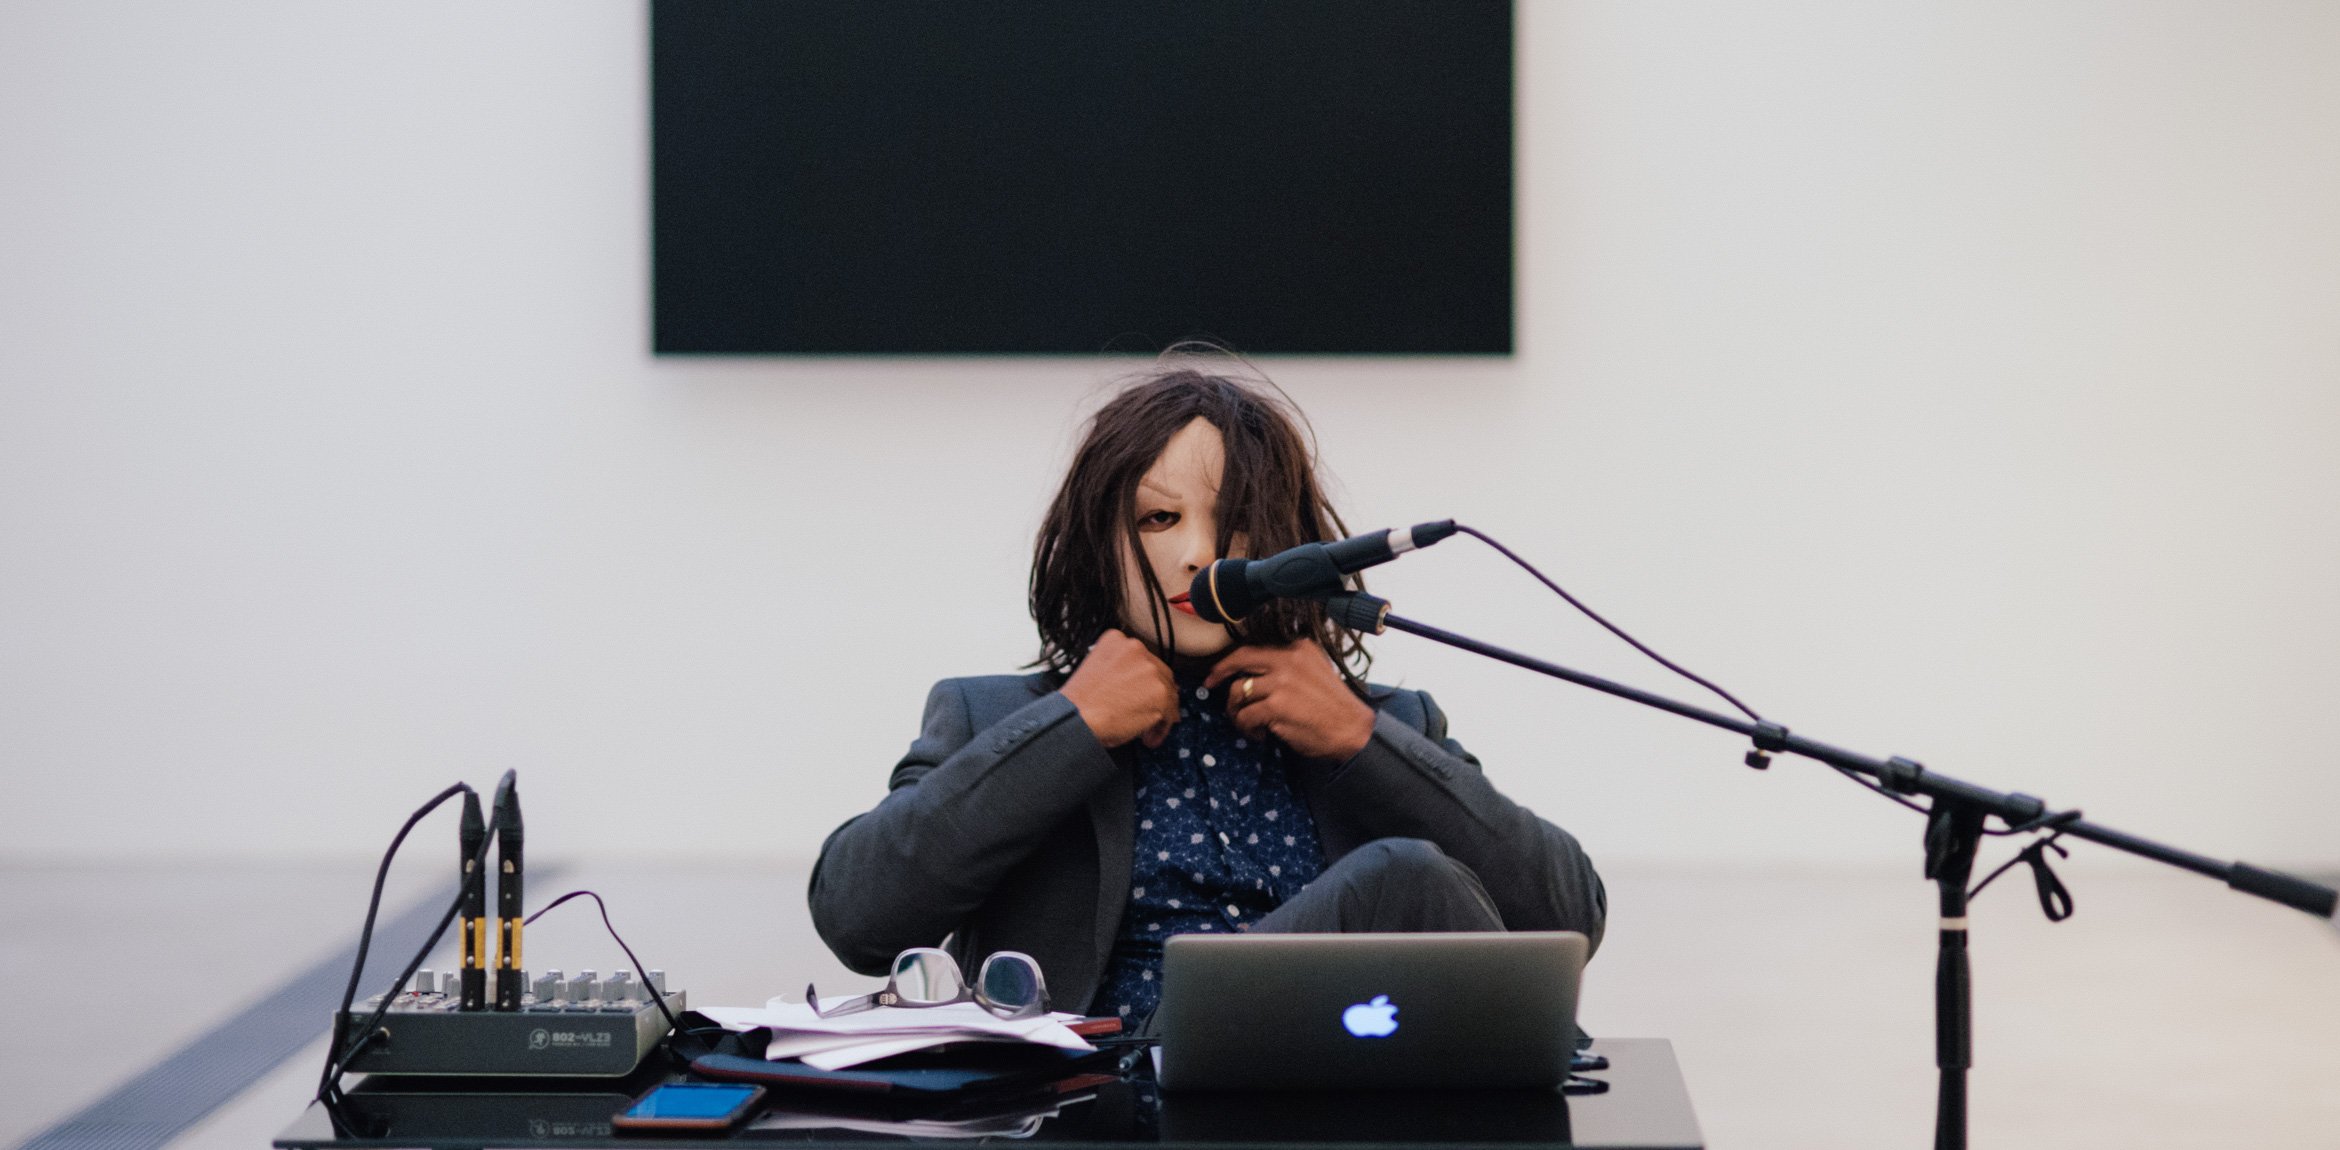 Ronaldo Wilson sits in a mask behind a desk with a microphone and laptop, in front of Ellsworth Kelly's 